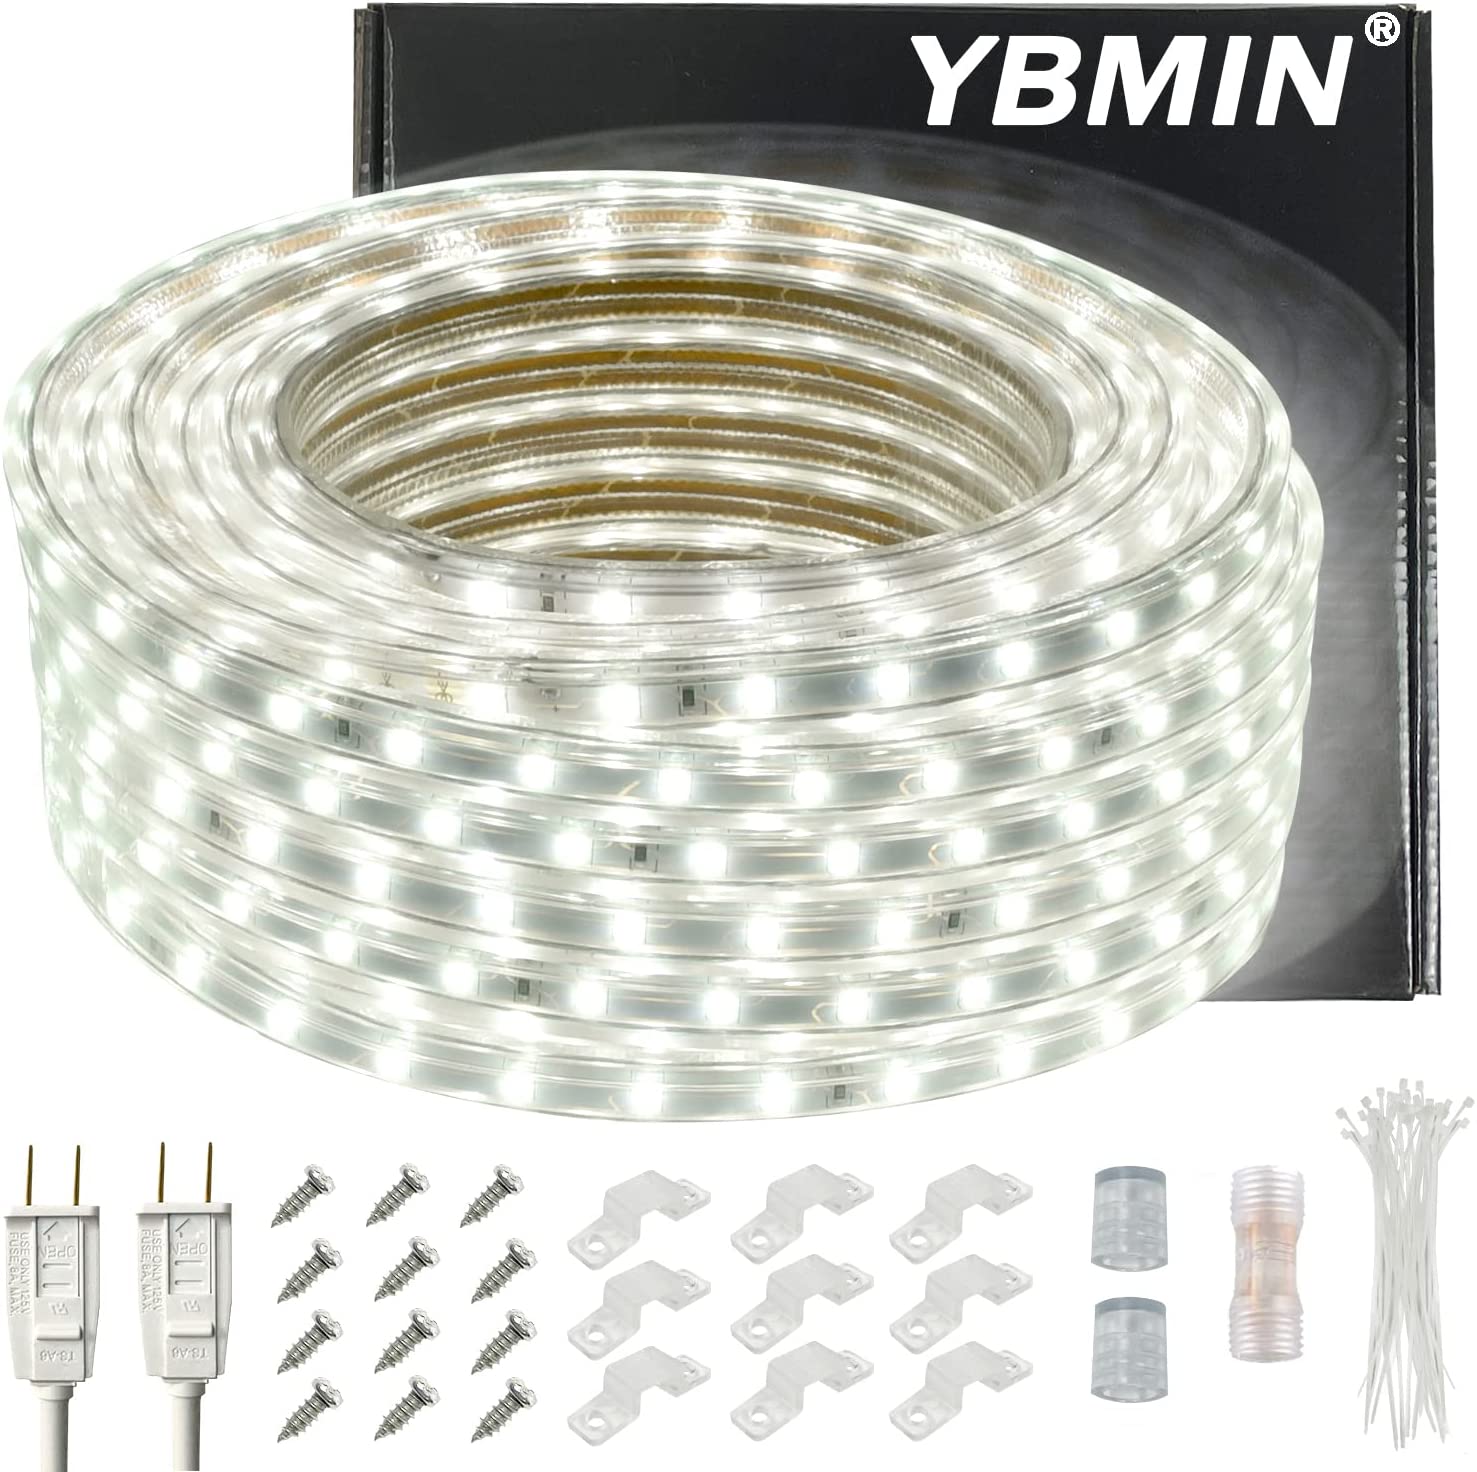 YBMIN LED Rope Light Outdoor Waterproof – 110V White 50ft Bright Cutable Lighting – Connectable Flexible Plug Clear Flat Lamp Tube – Indoor Garden Deck Patio Christmas Camping Holiday Decor Halloween